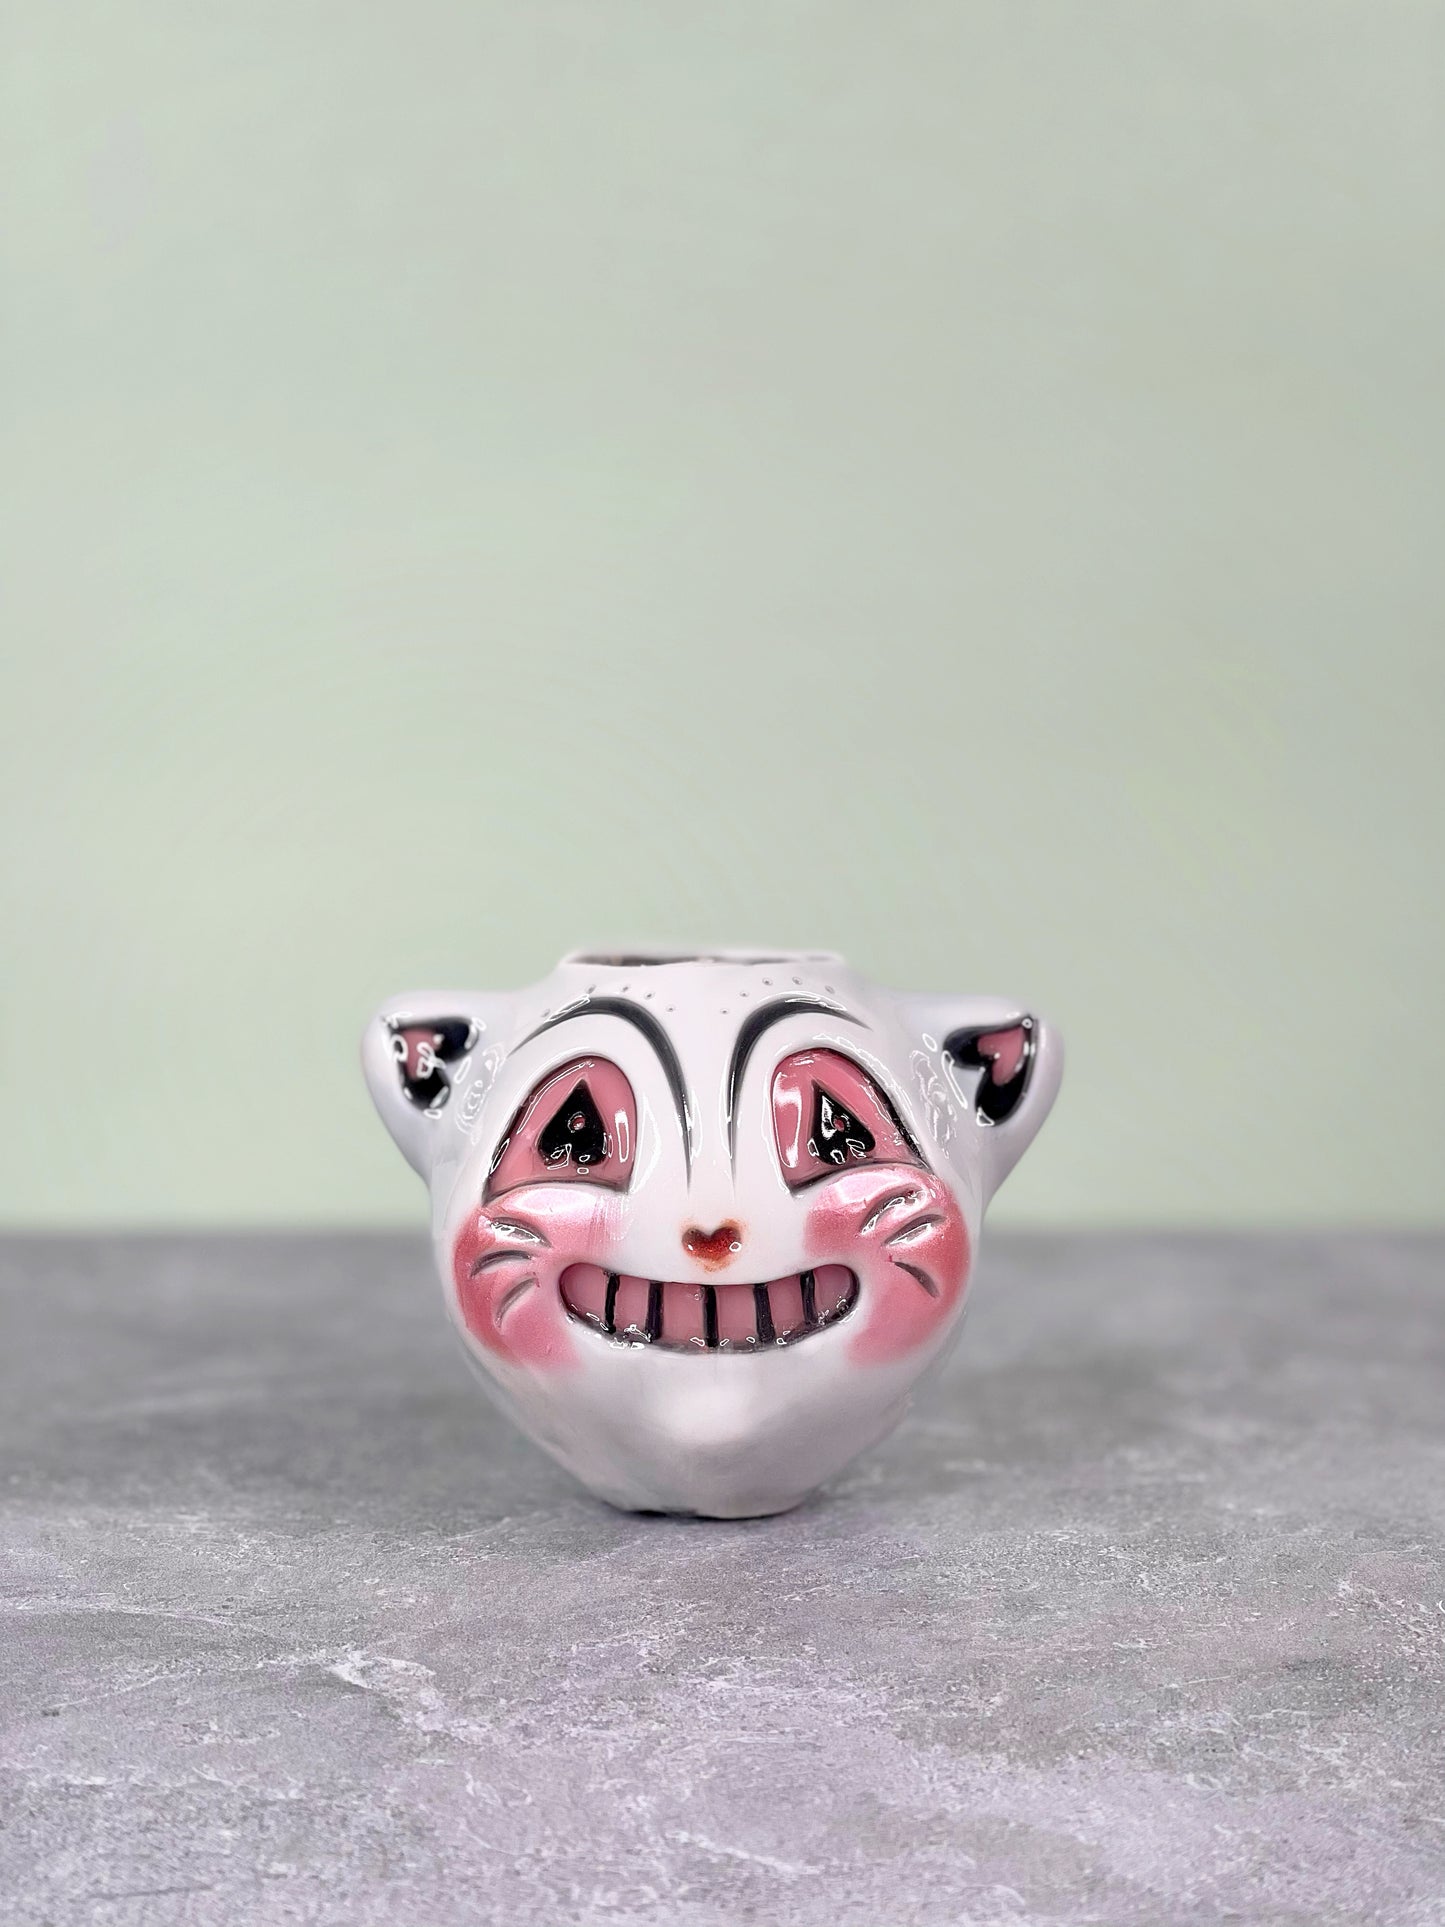 Valloween Grinning White Cat Mini in collab w/ Johanna Parker